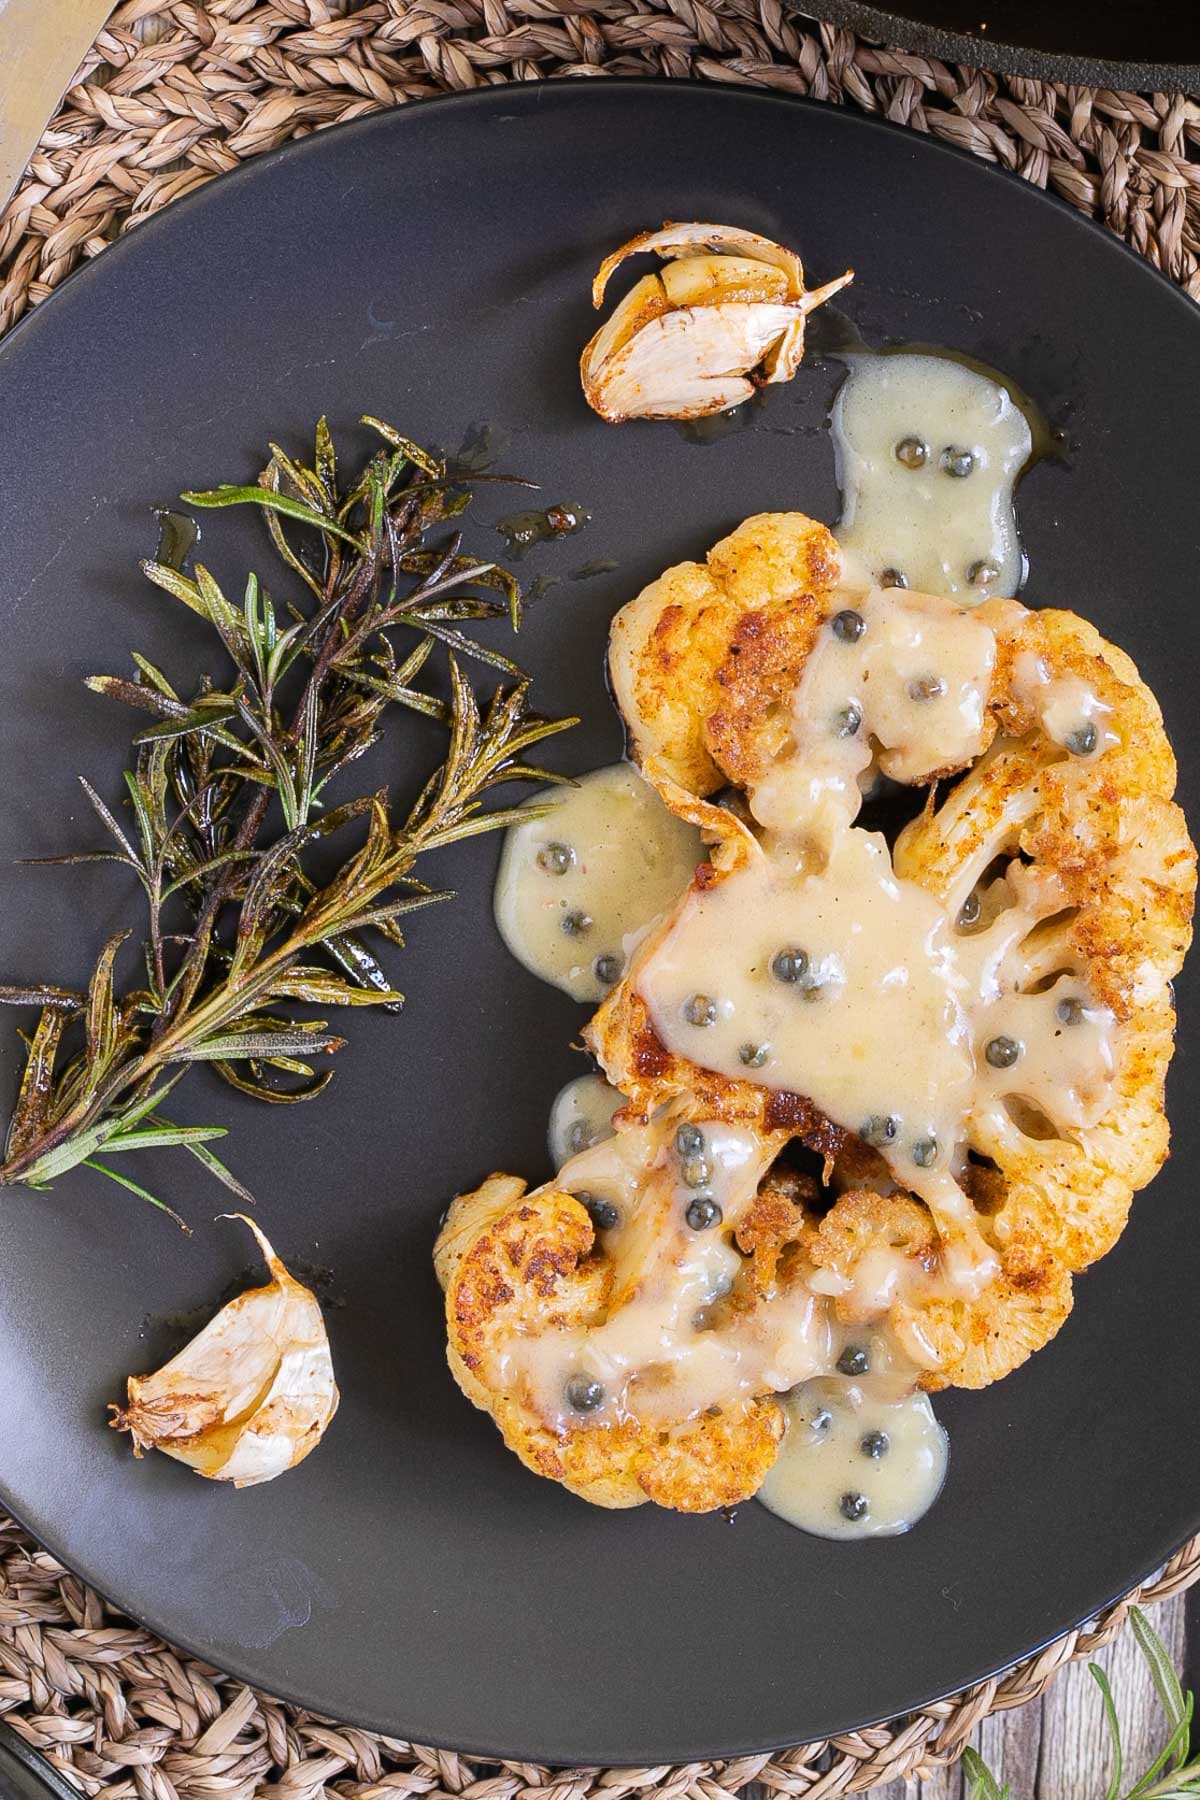 A crispy brown orange cauliflower slice is served on a black plate with roasted garlic cloves and wilted rosemary twigs.